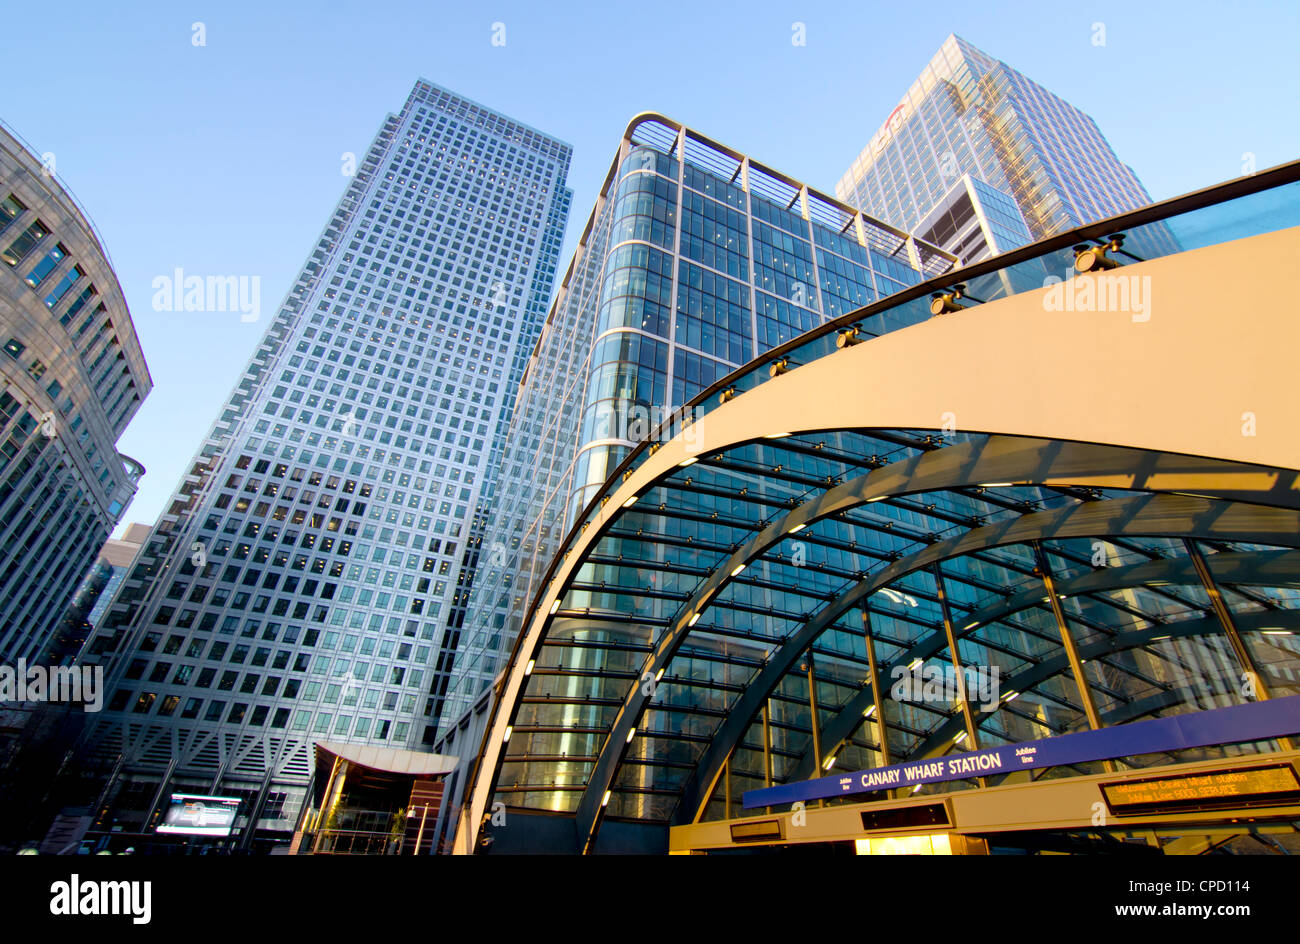 La station de Canary Wharf, Isle of Dogs, Docklands, Londres, Angleterre, Royaume-Uni, Europe Banque D'Images